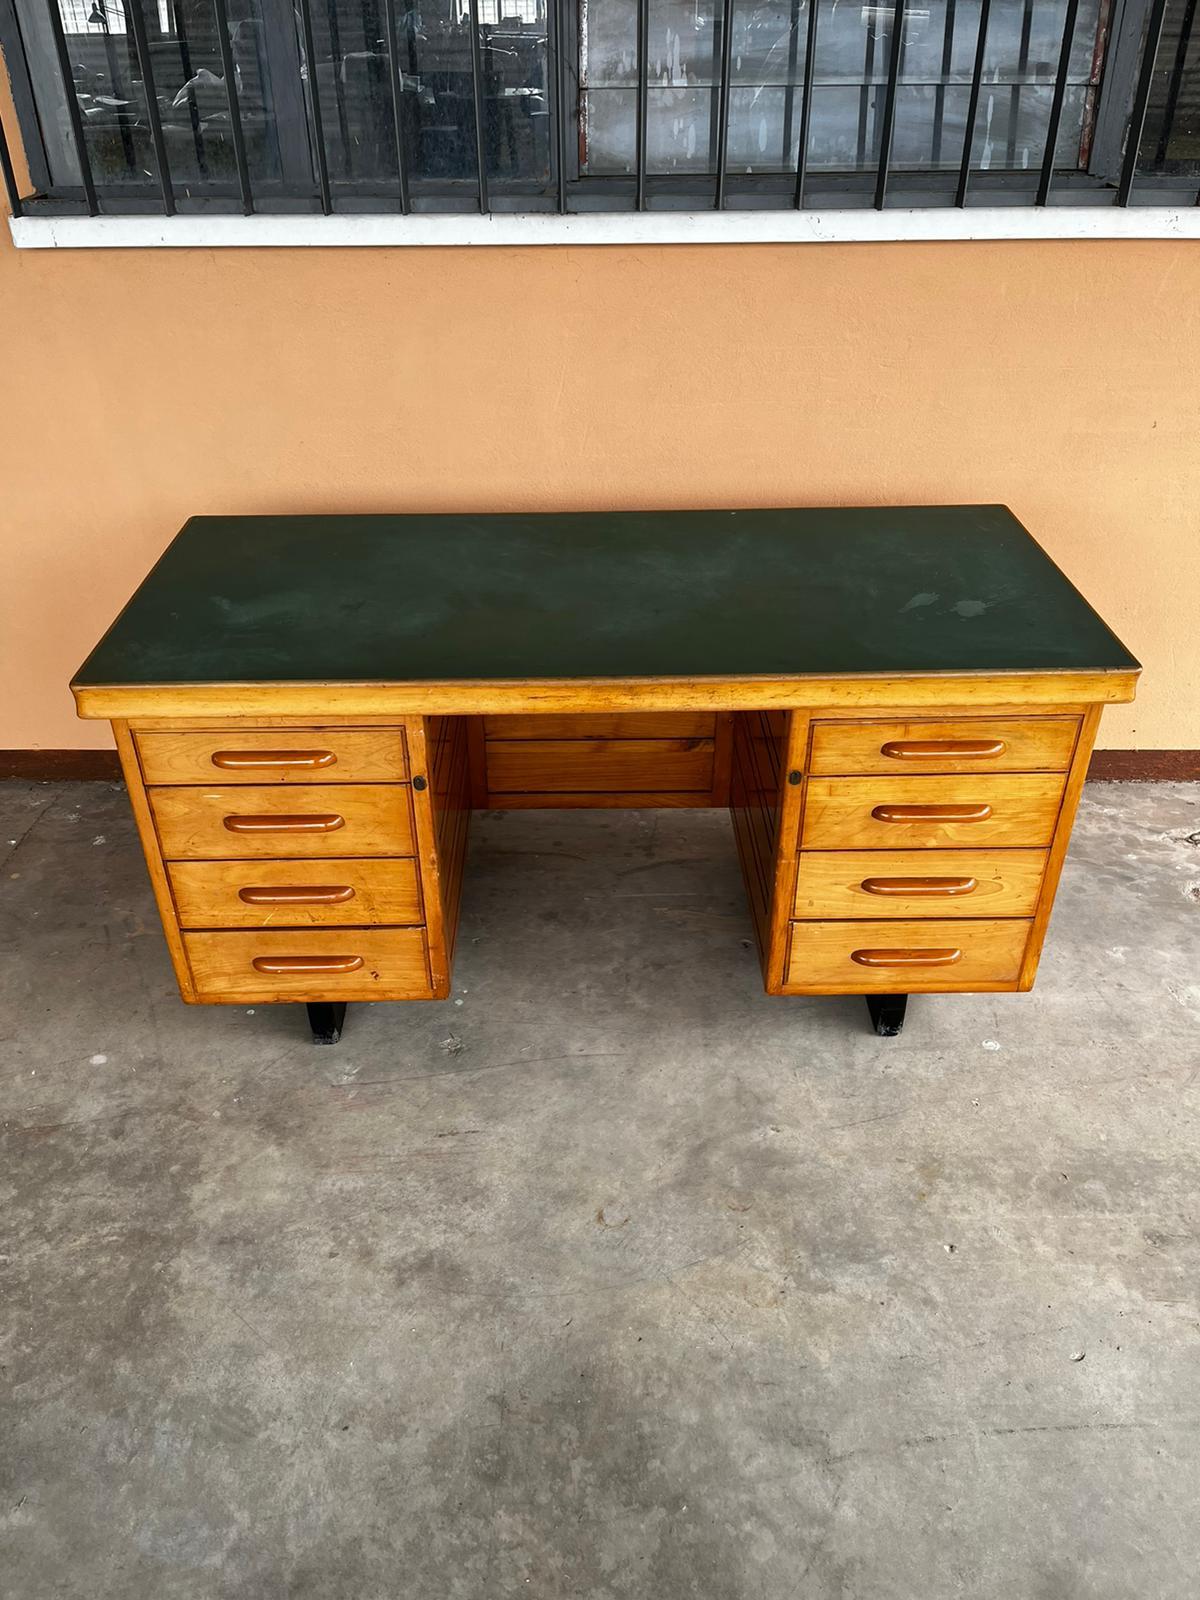 Mid-century green top and eight drawers wooden desk by Anonima Castelli
A wooden desk with eight drawers and green top.
This desk has been restored in conservative way.
Size: D 70 x W 160 H 78 cm

A video is available upon request.
 

 